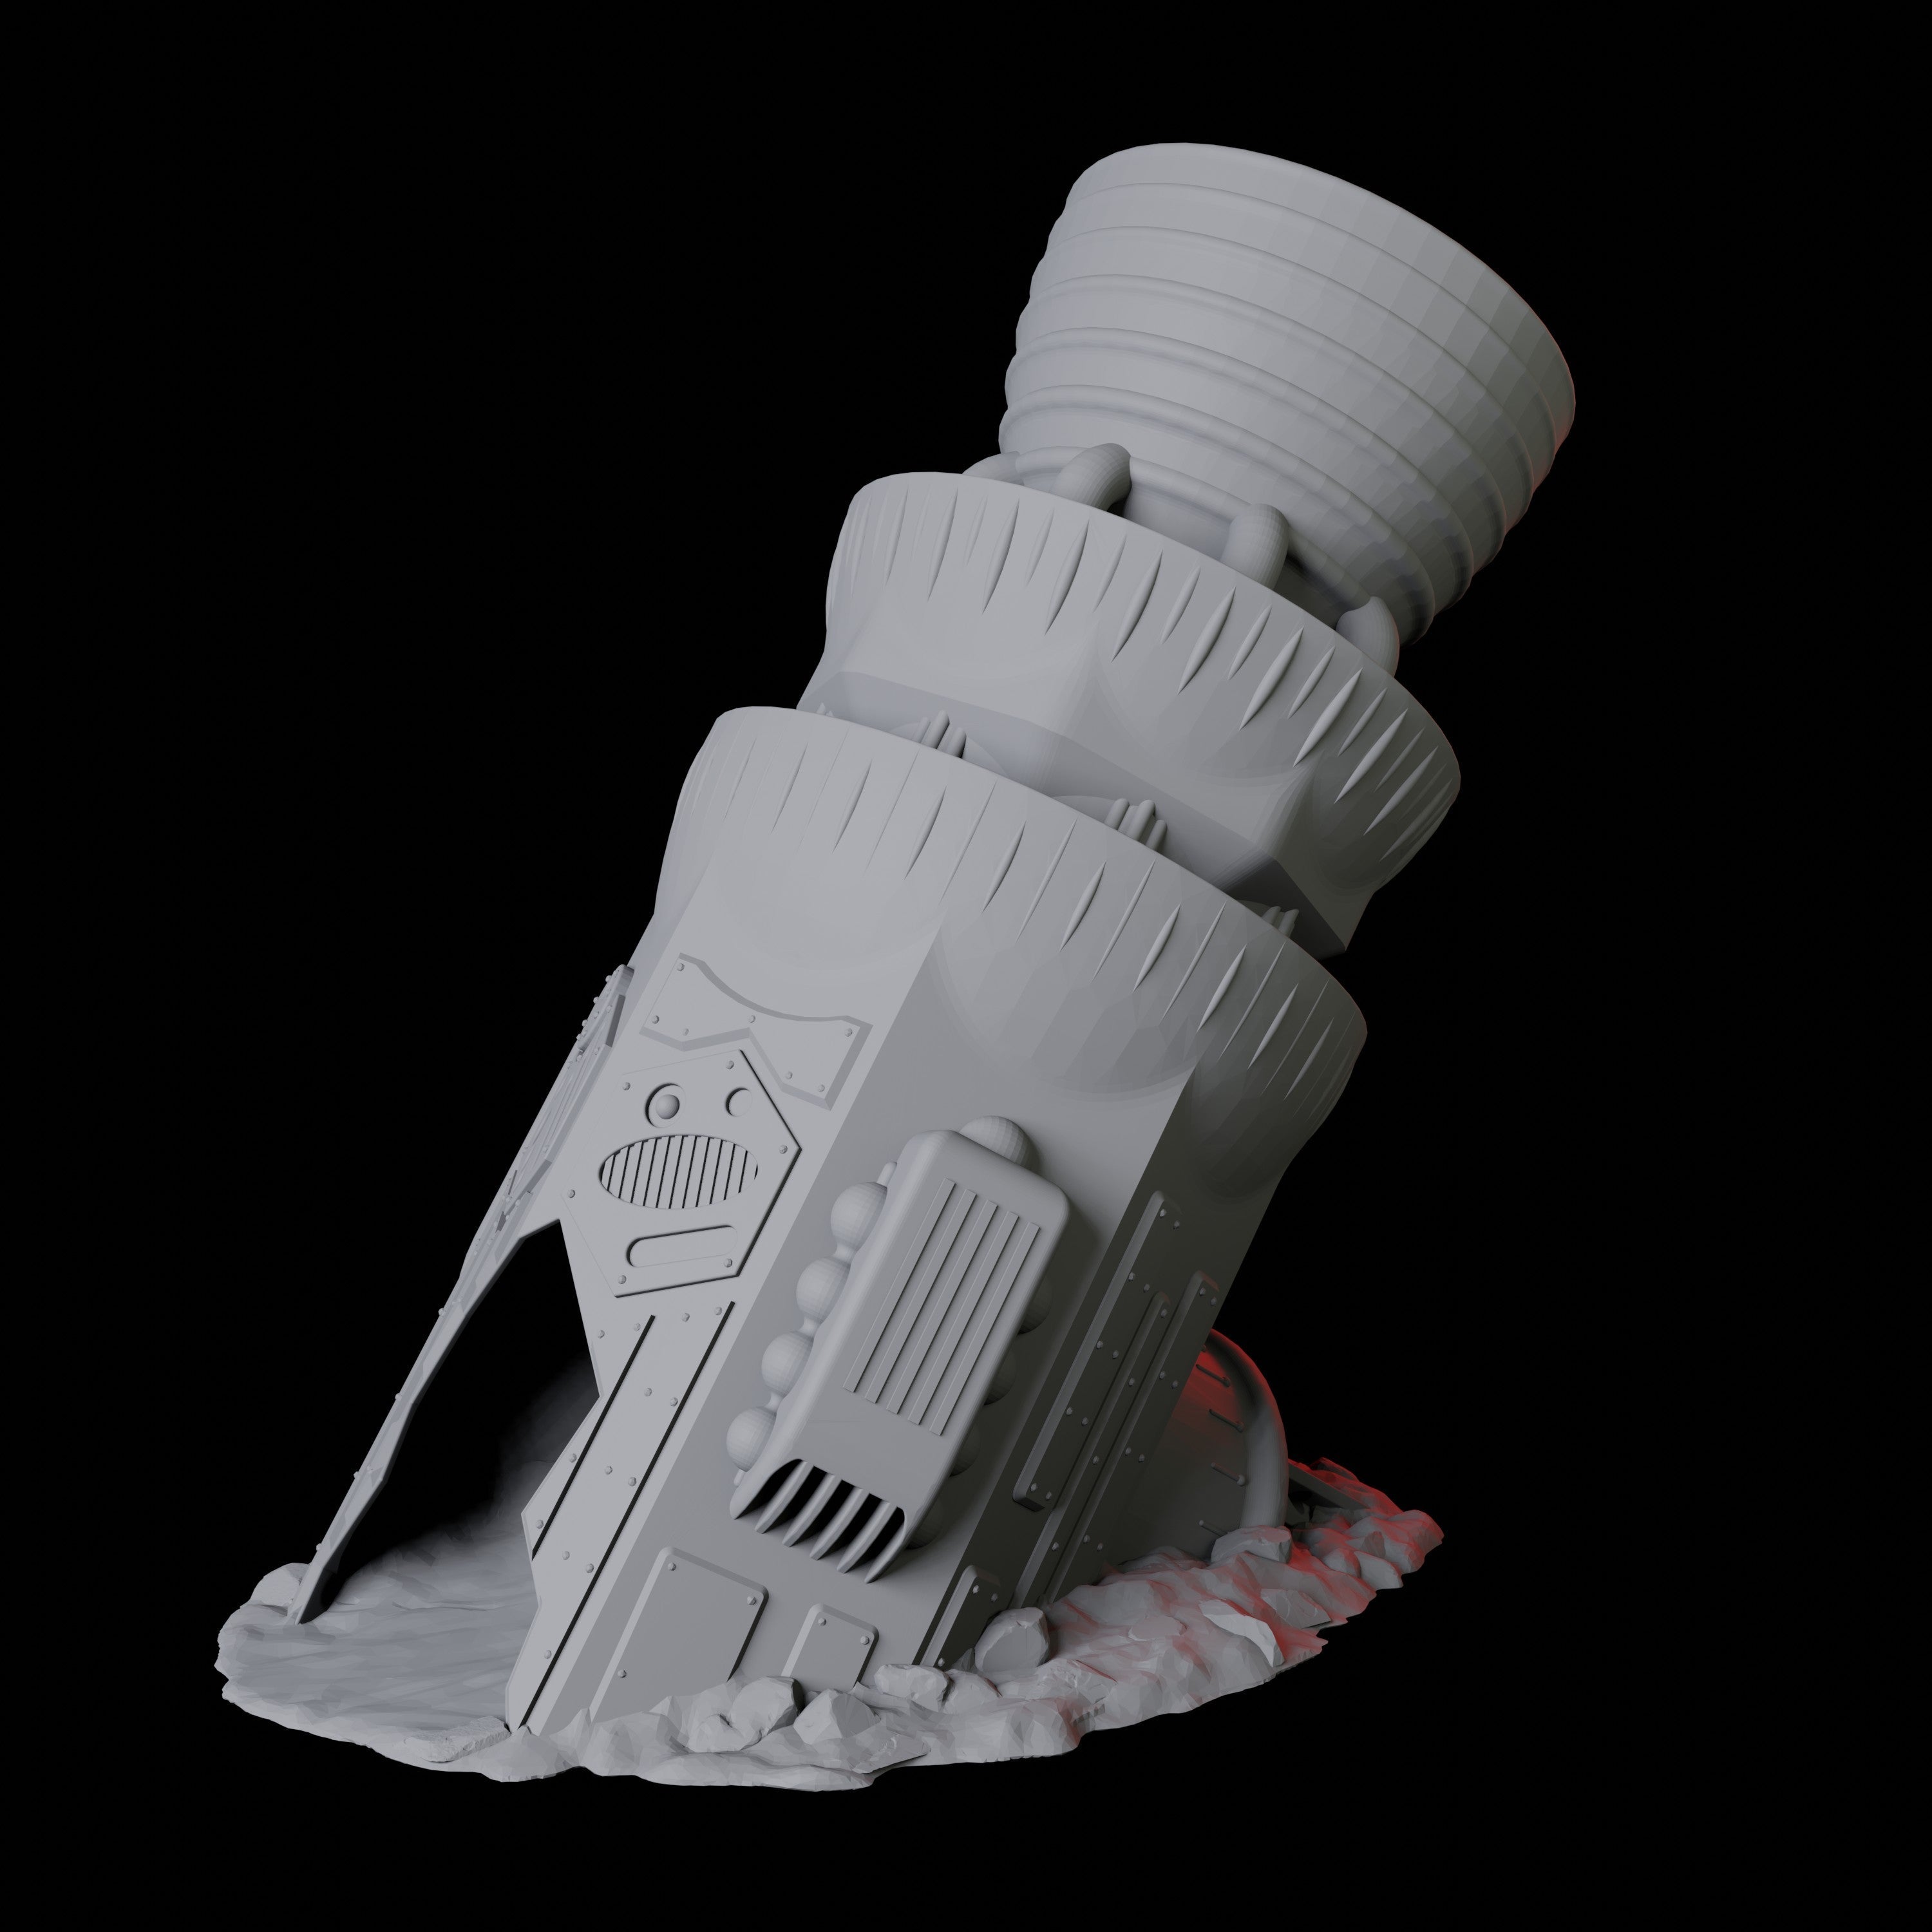 Space Ship Dice Tower Miniature for Dungeons and Dragons